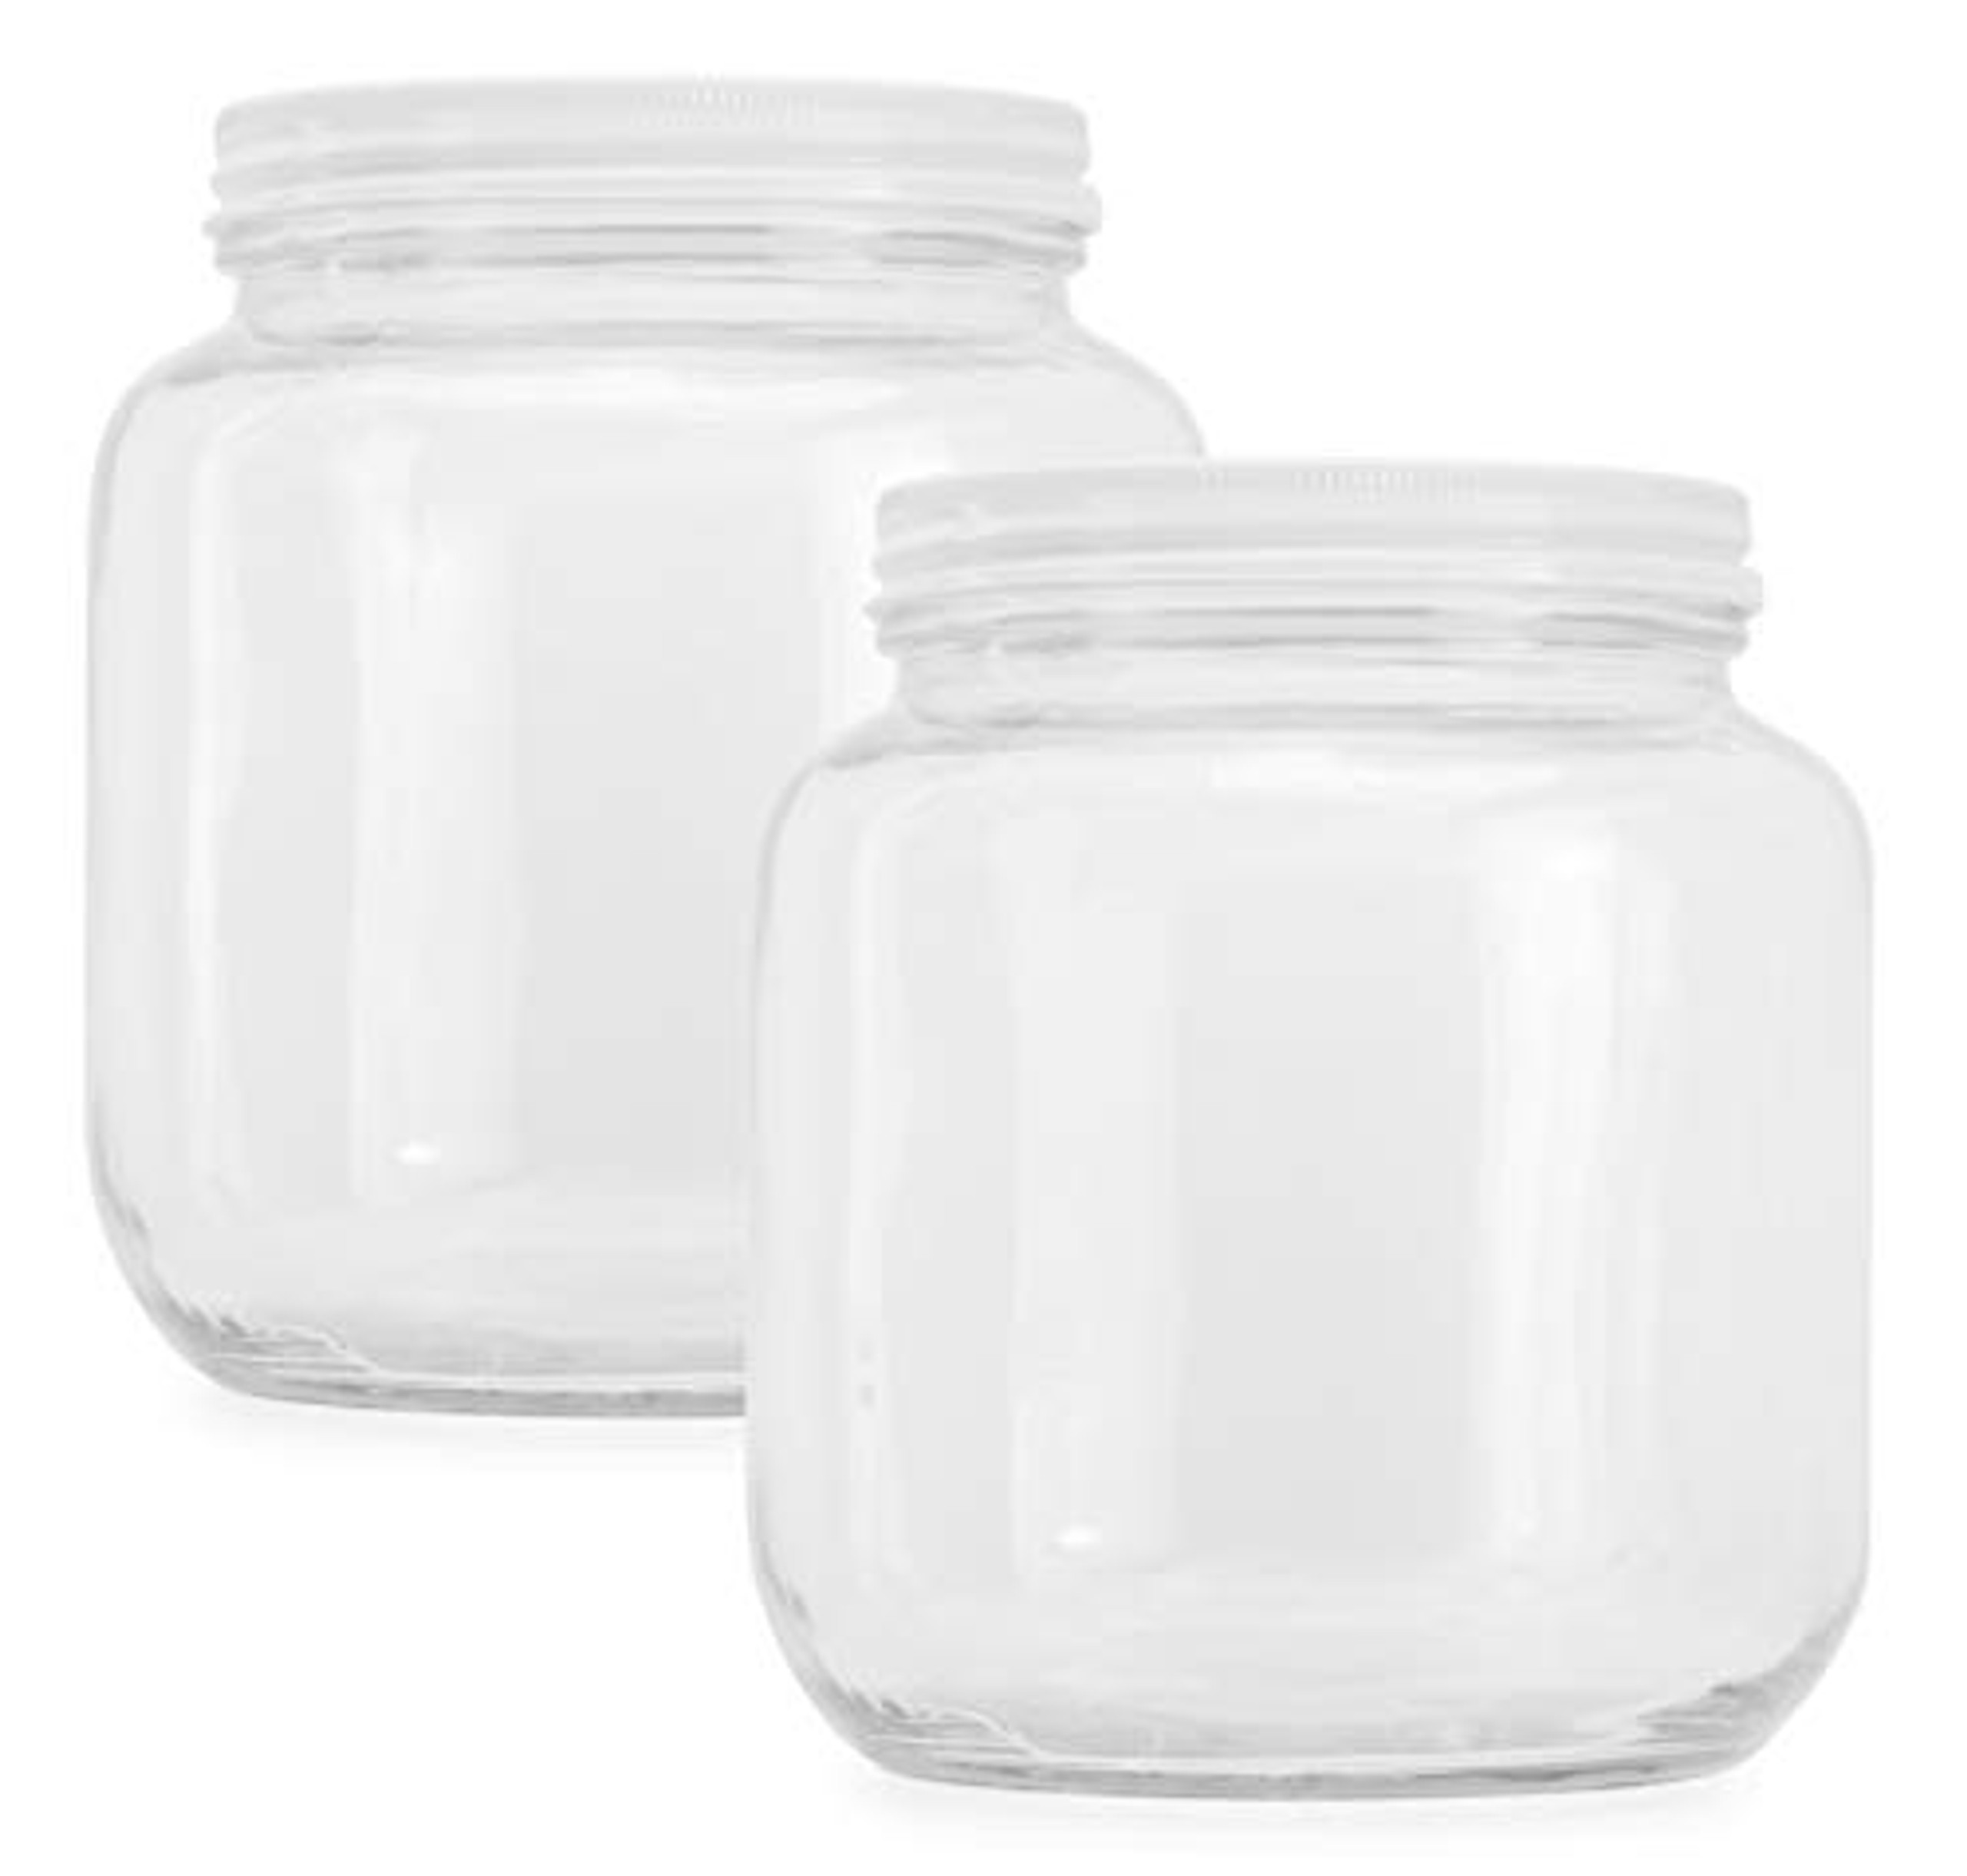 4 Ounce Cobalt Blue Glass Straight Sided Cosmetic Jars 12 Pack 120 Ml Capacity Bpa Free Lids